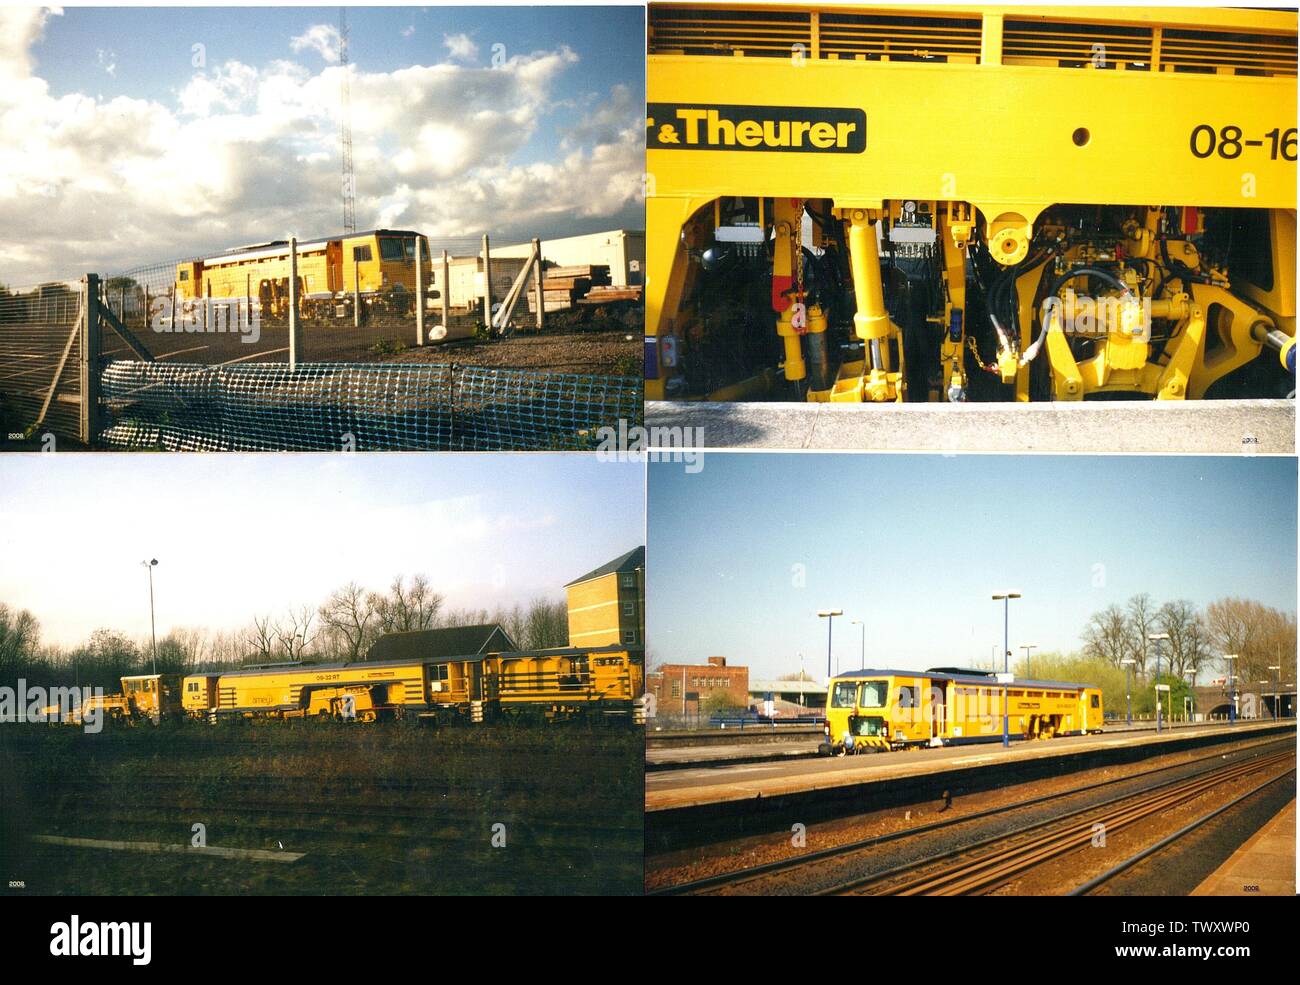 (I took this picture of a Amey Plc track tamper train my self at Banbury and Duddeston (bottom left) stations in the year 2008. I here by release it in to the public domain.; 9 April 2010 (original upload date); Own work; Snow storm in Eastern Asia at English pedia; Stock Photo